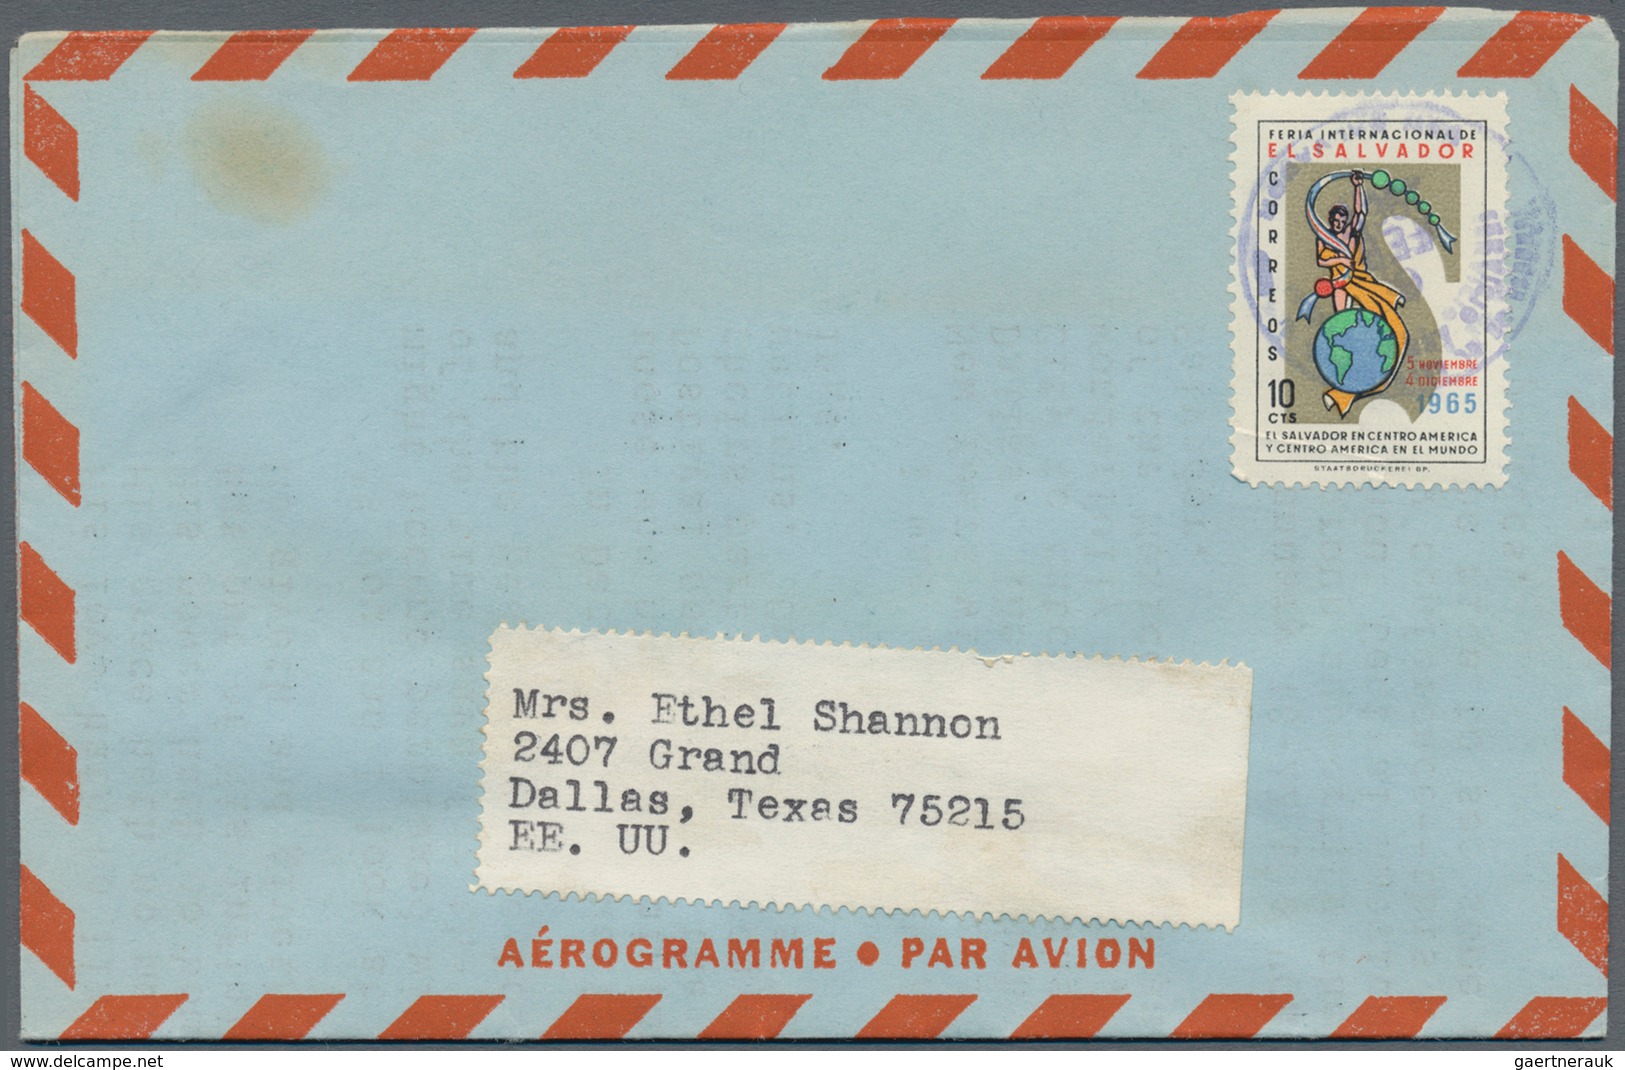 Alle Welt - Ganzsachen: Ca. 2000 Aerogrammes (unfolded, used, CTO) and postal stationery from El sal